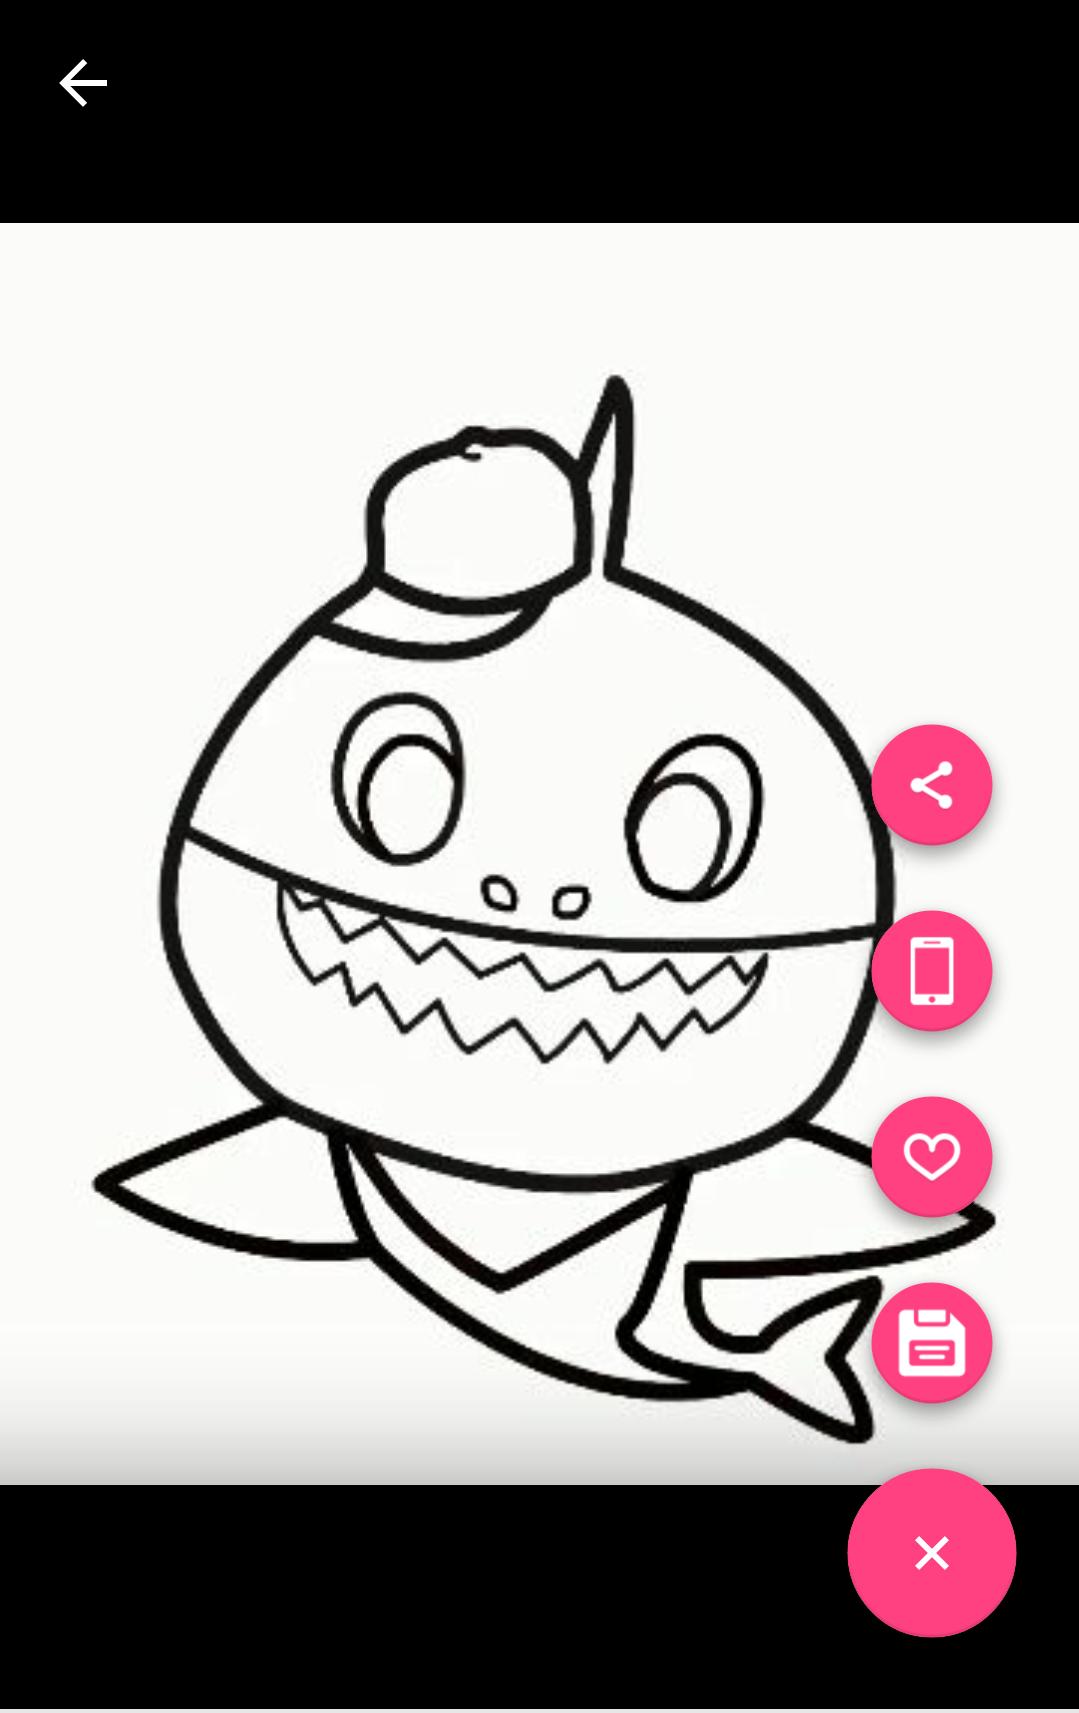 How To Draw Baby Shark for Android - APK Download